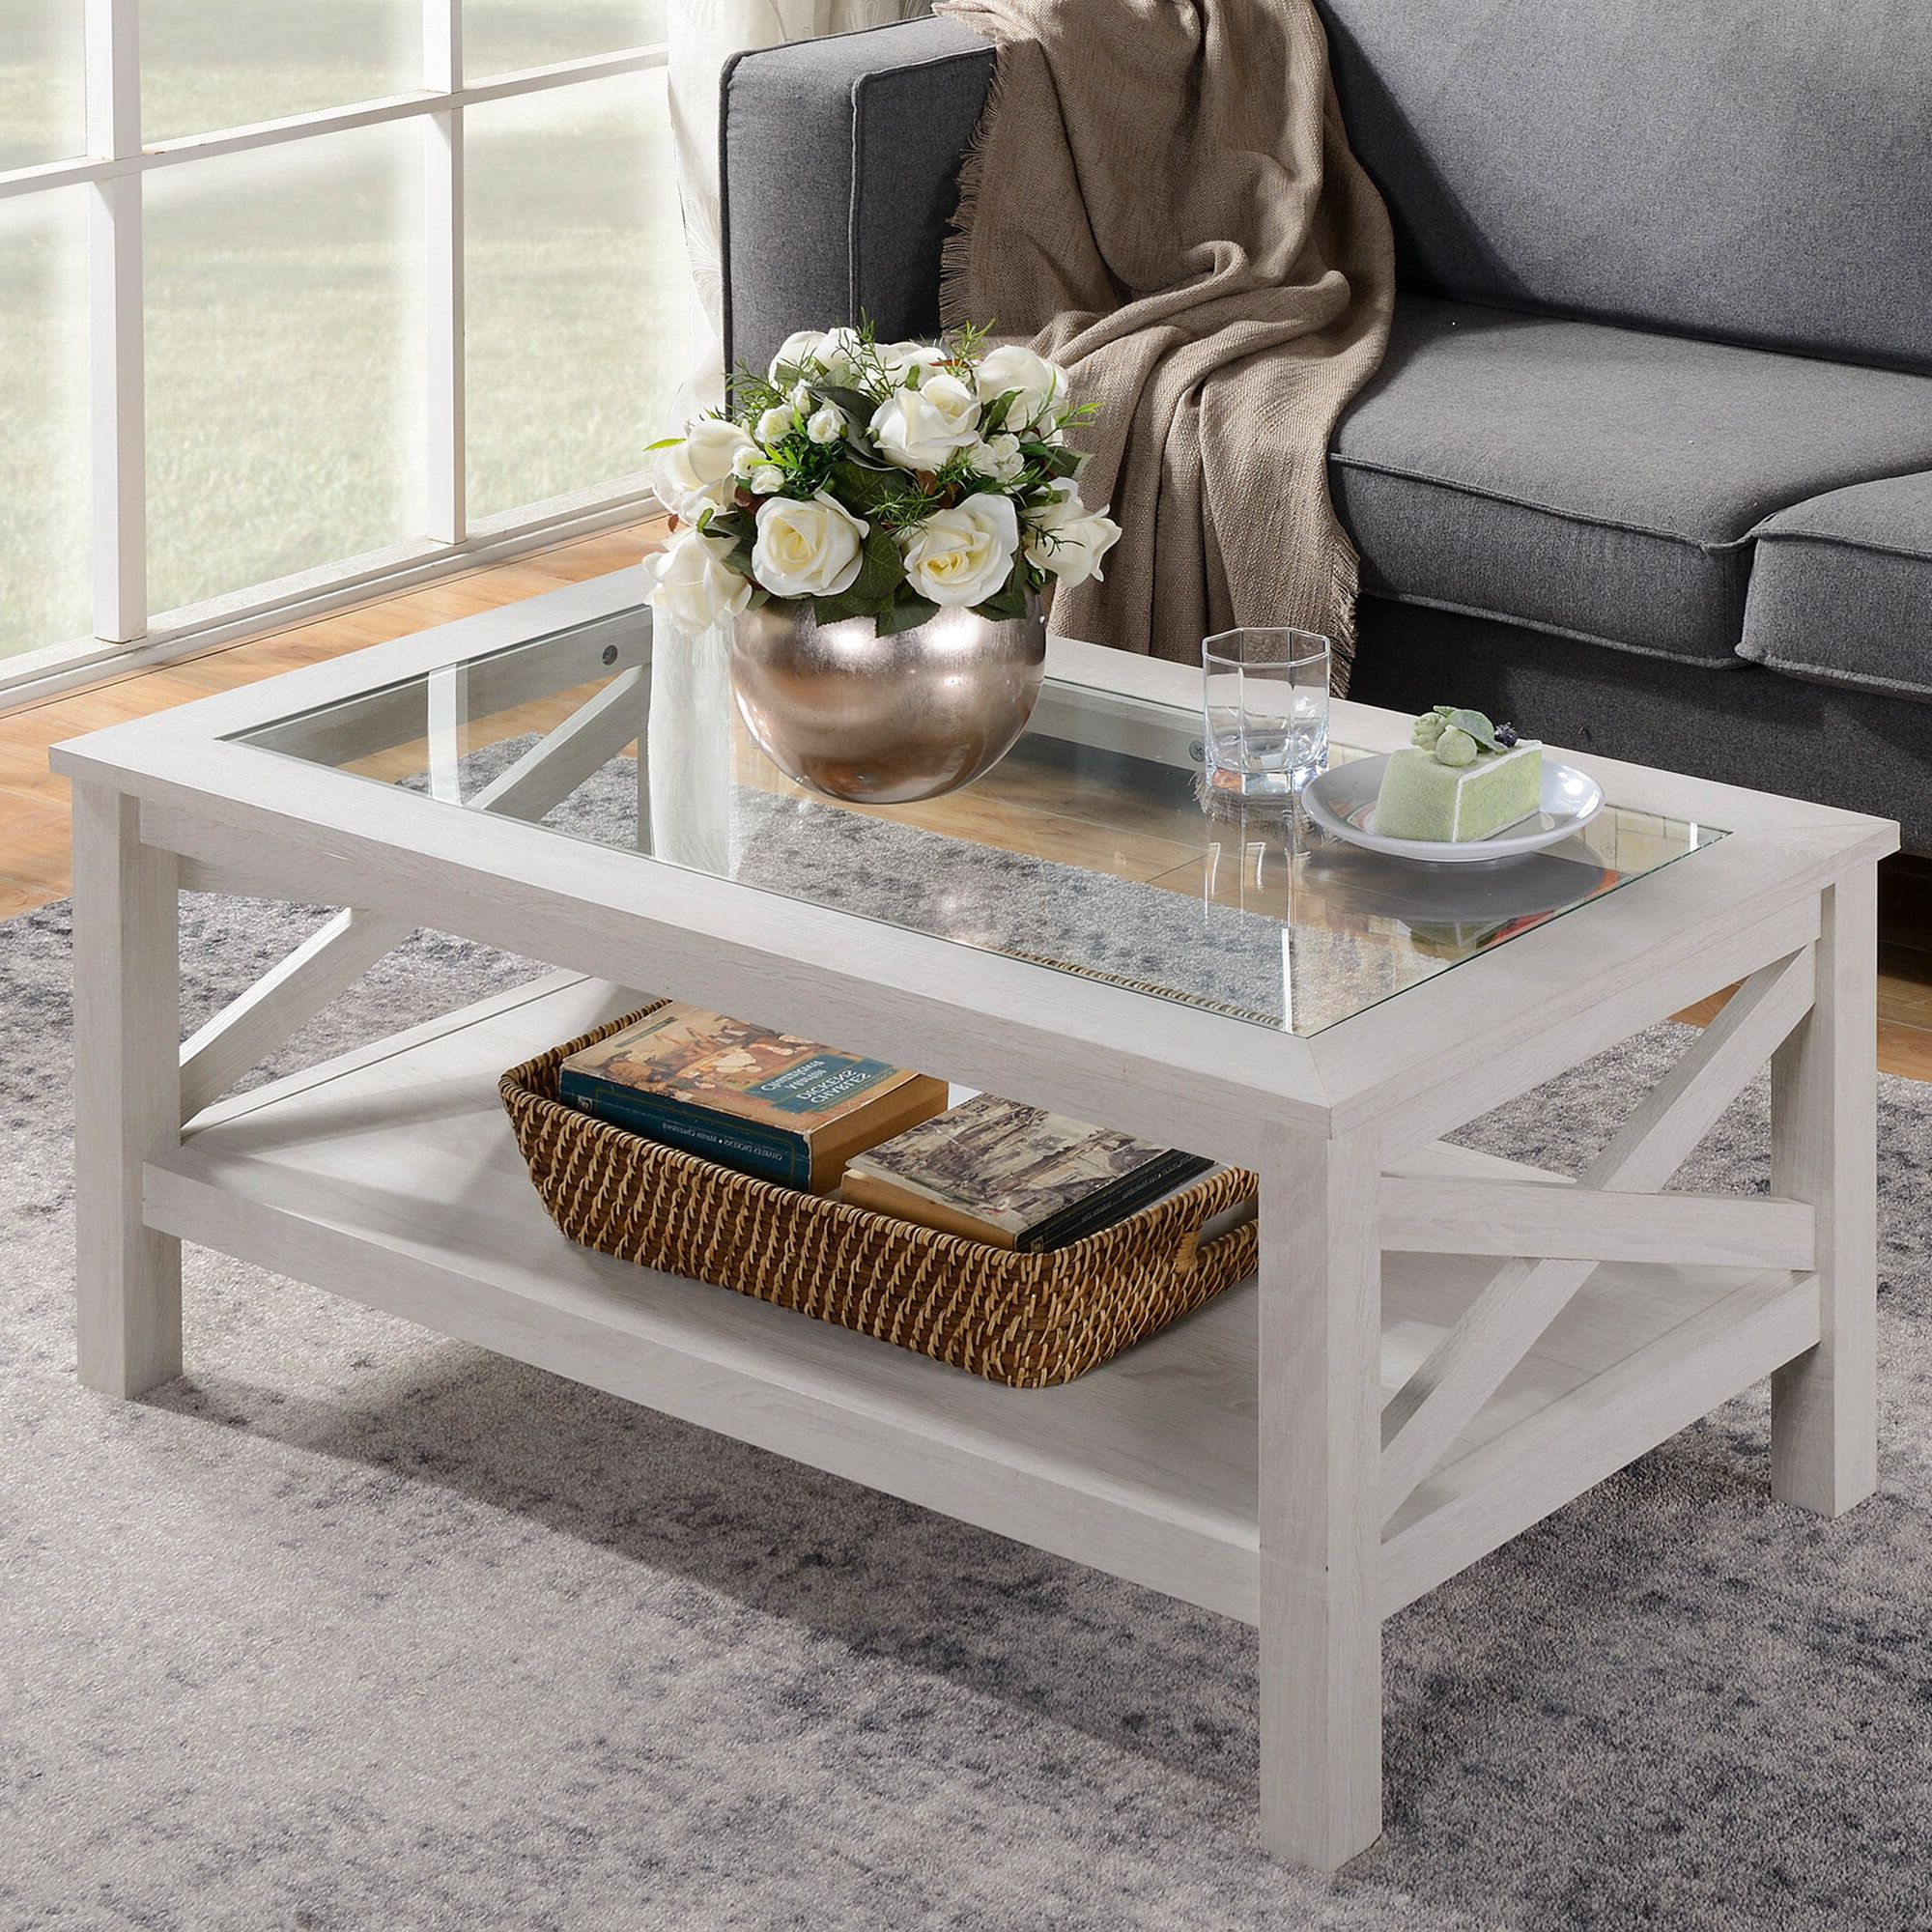 Popular Tempered Glass Top Coffee Tables For Gracie Oaks Espinet Traditional Coffee Table With Wood Frame, Tempered Glass  Tabletop And Underneath Storage Shelf, White Oak & Reviews (Gallery 20 of 20)